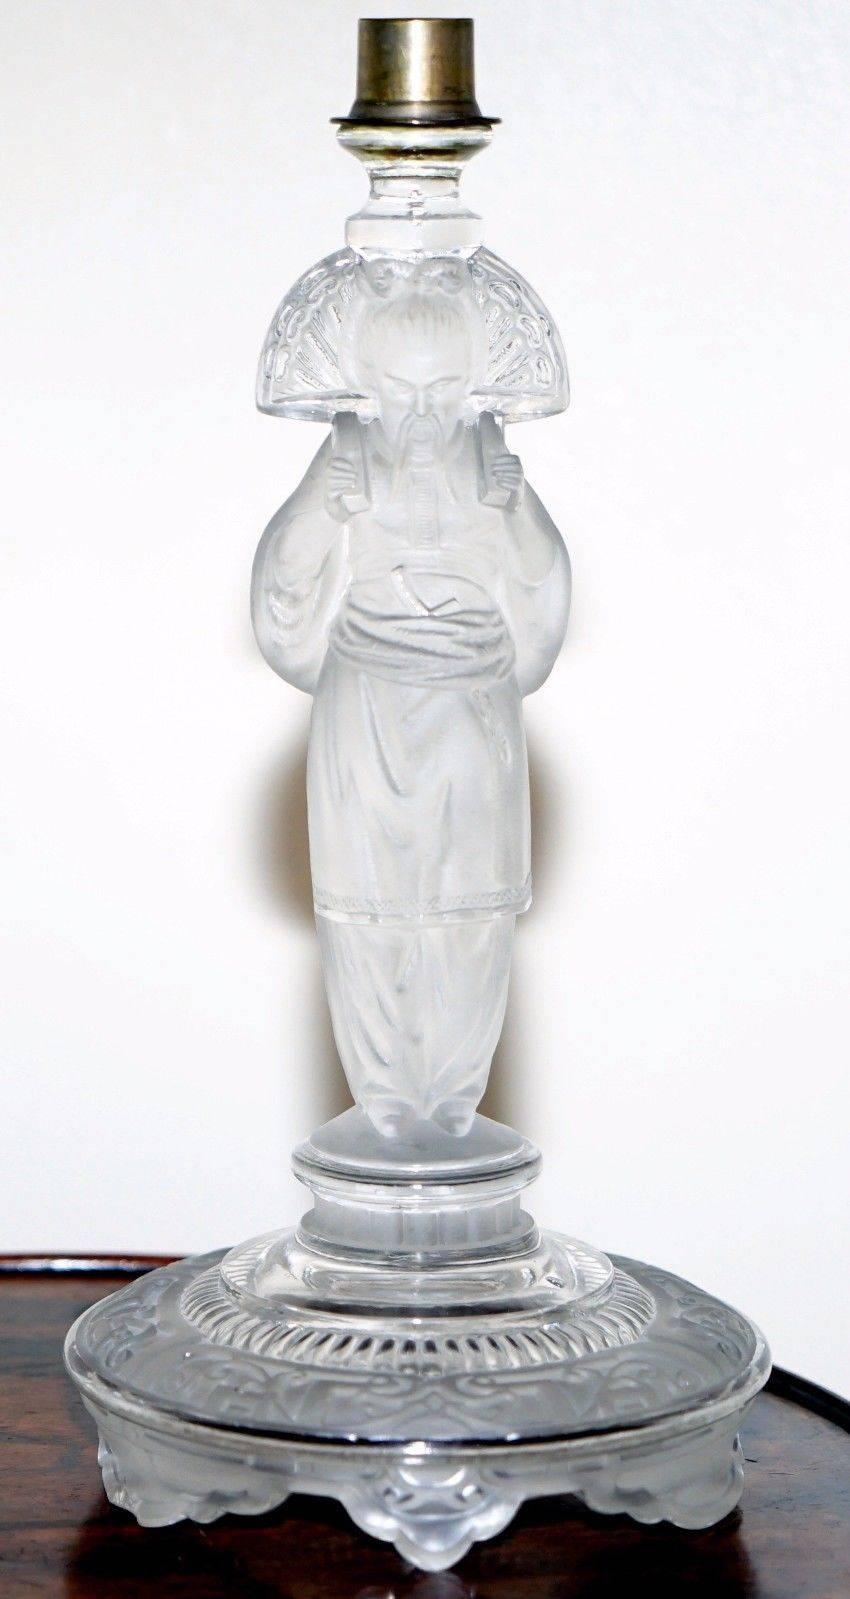 We are delighted to offer for sale this exceptionally rare pair of frosted glass circa 1920 glass candlesticks of a Chinese nobleman and lady

I have never seen another pair like these, possibly made for Liberty’s London, they are truly a